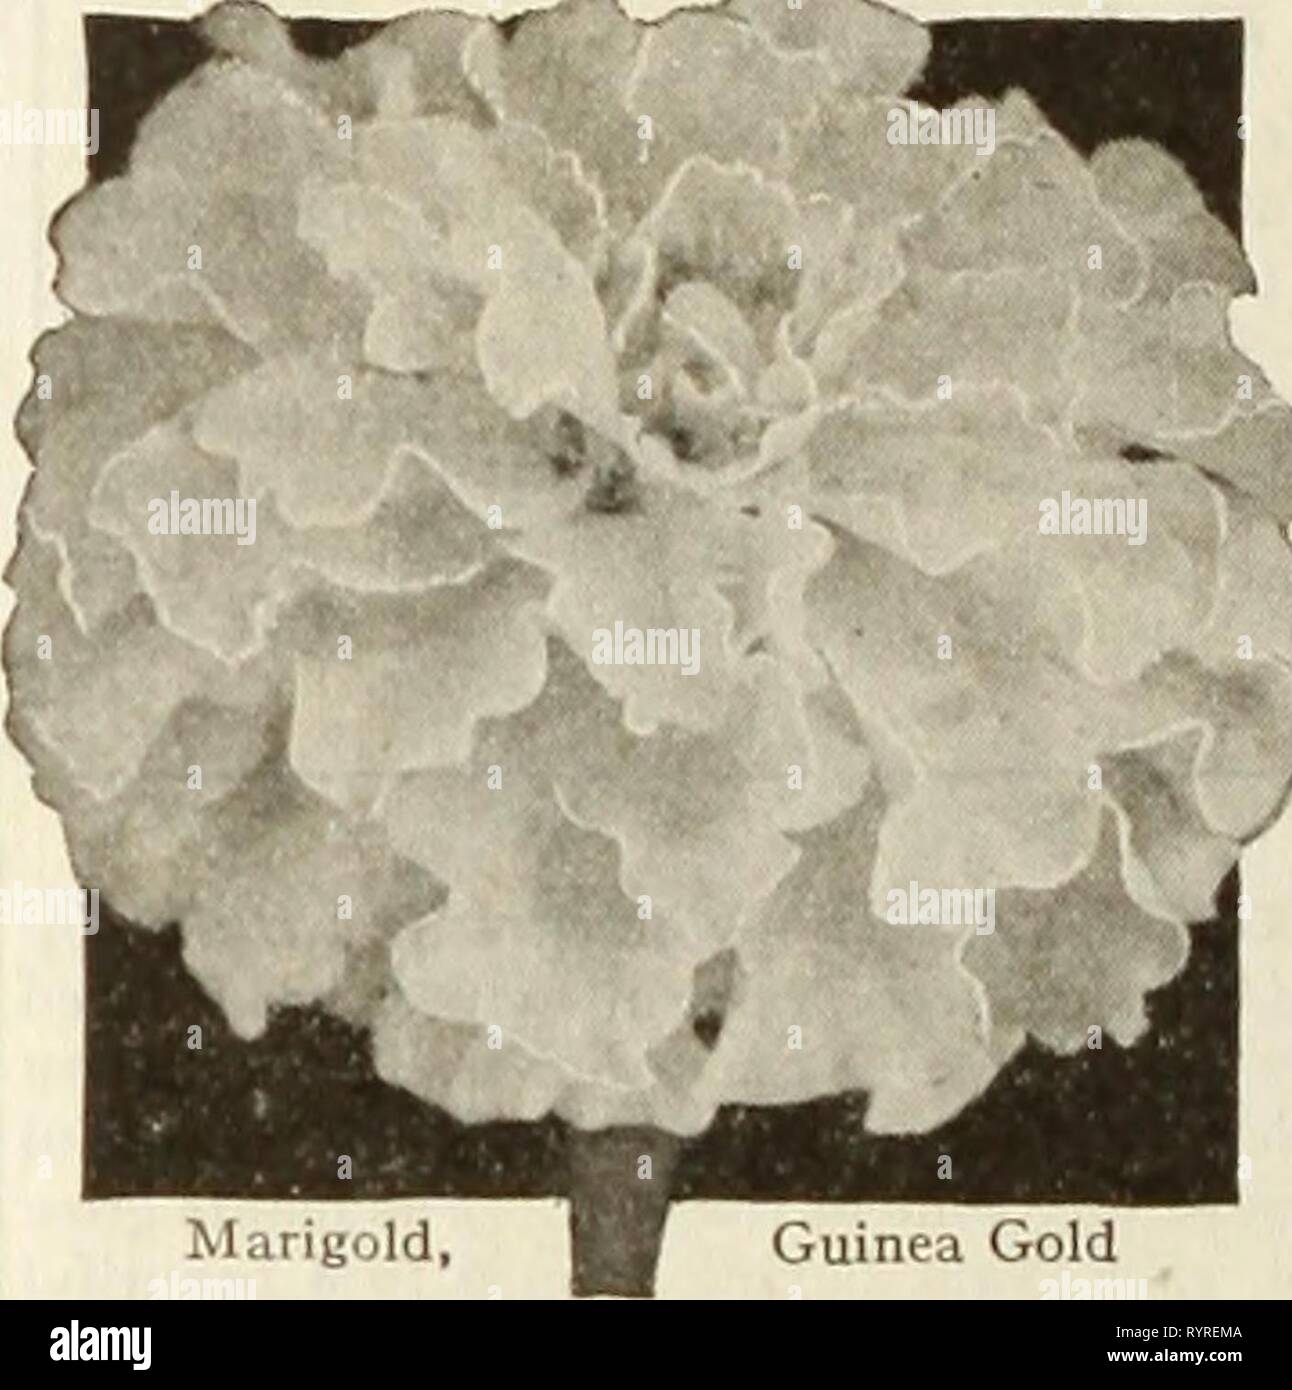 Dreer's seeds plants bulbs for Dreer's seeds plants bulbs for summer planting . dreersseedsplant1936henr Year: 1936  Linaria, Fairy Bouquet fall. 50c. Pkt. 15c; special pkt. LAXpinuS—Lupines ® Hartwegi. Very valuable as a cut flower producing splendid long spikes set with lovely small flowers which combine into a solid spire of color. The plants grow 2 feet high and yield a large quantity of splendid flowers for cutting. 3044 Rich Blue 3045 Sky Blue 3046 Rose 3047 White 3049 Lupine Collection. A ny of these: Pkt. 10c; •J oz. 25c; oz. 40c. One packet each of the 4 colors (value 40c) for 30c. 30 Stock Photo